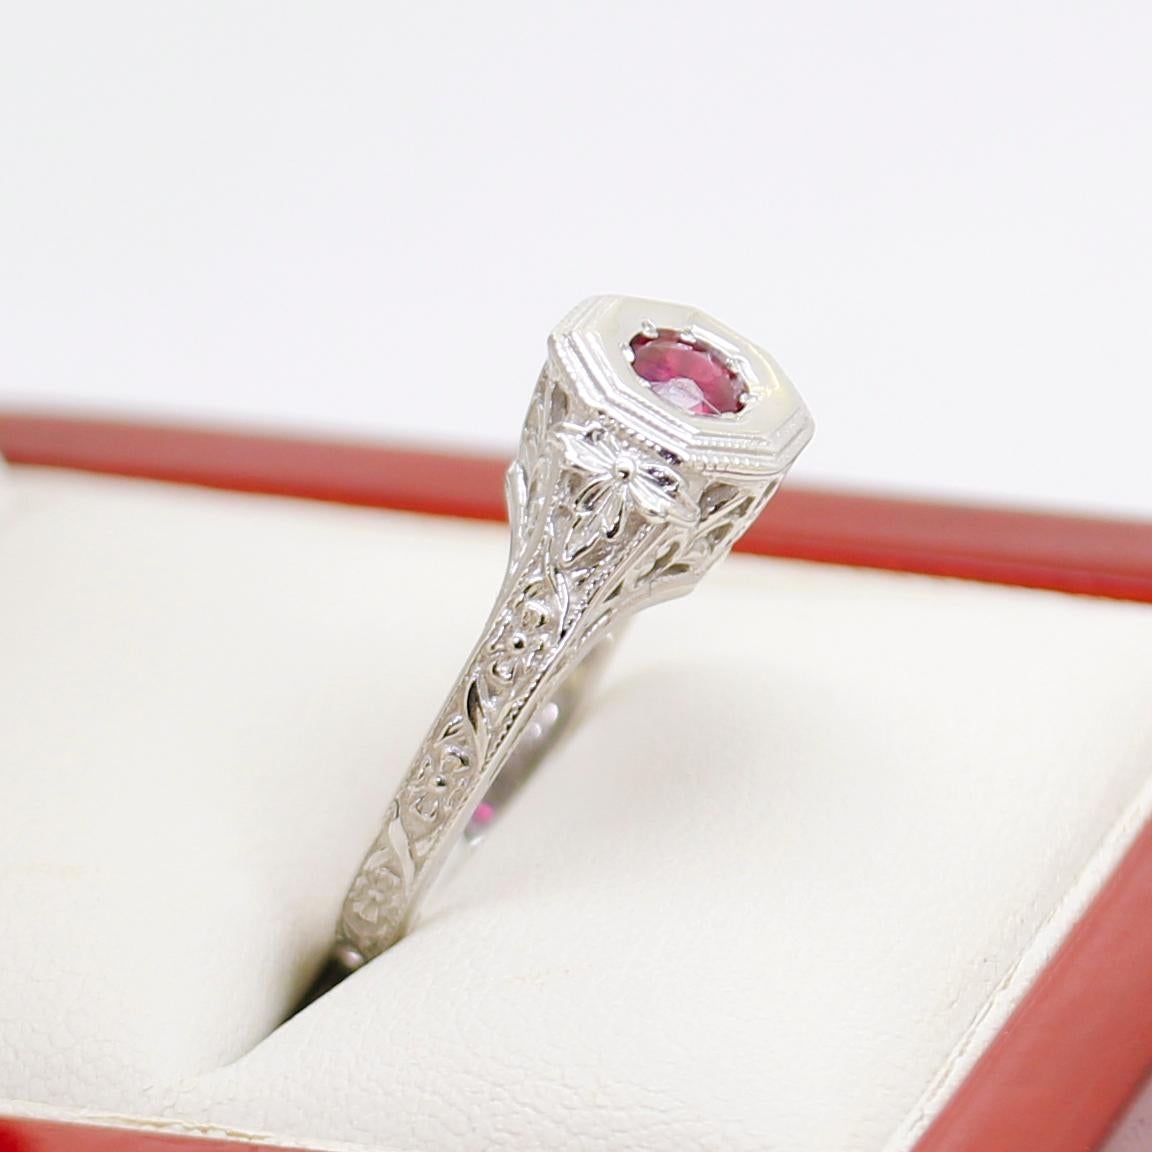 Vintage Filigree Ruby Ring In Good Condition For Sale In BALMAIN, NSW